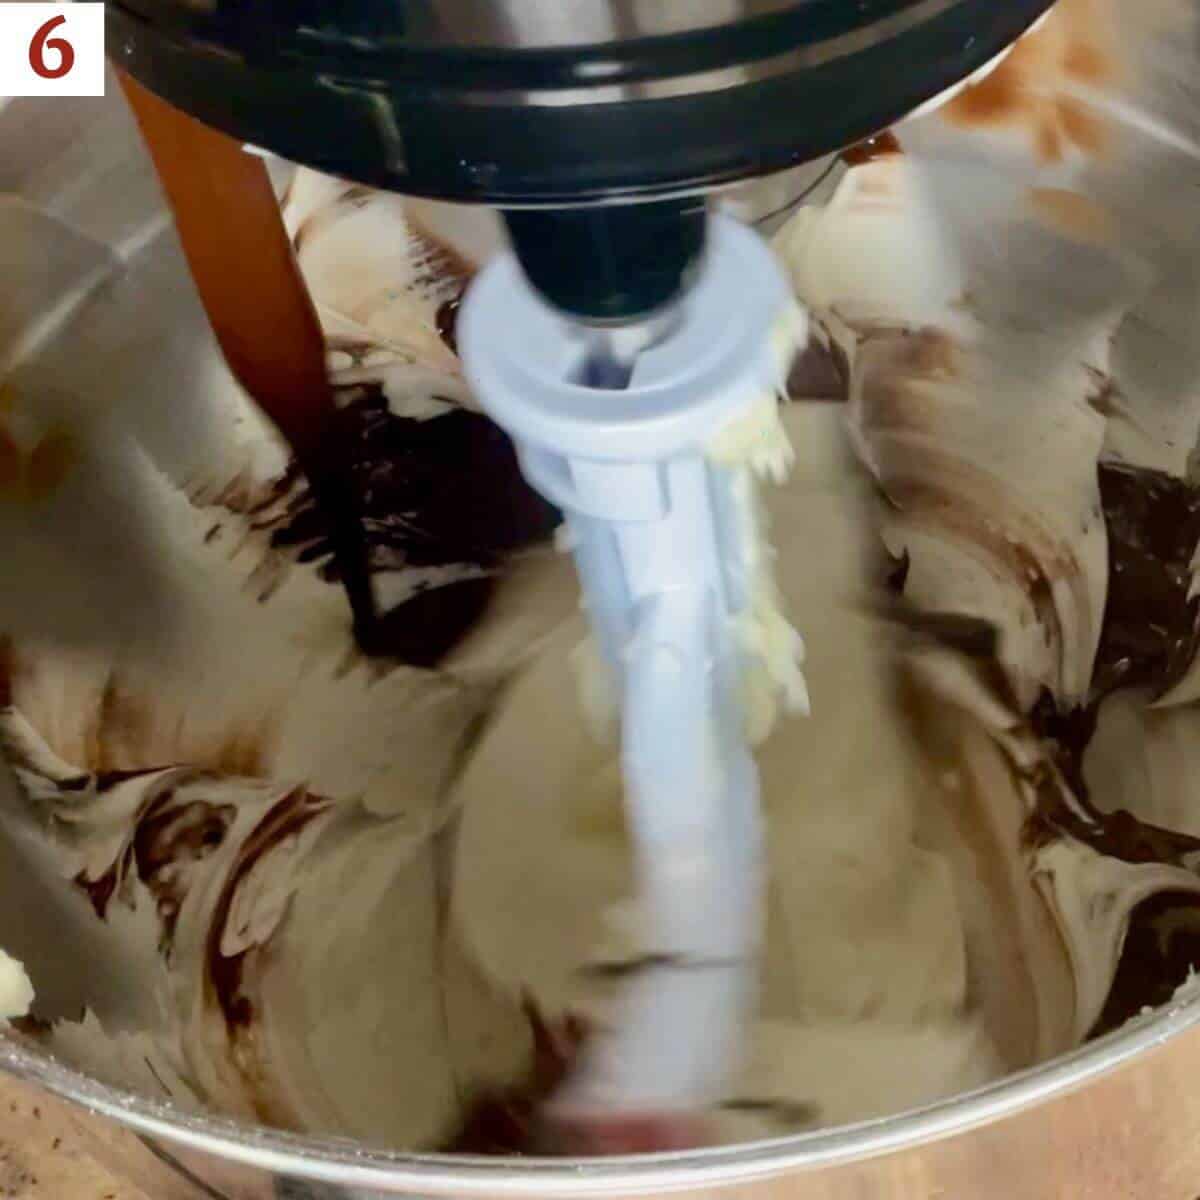 Adding melted chocolate to buttercream in a stand mixer bowl.